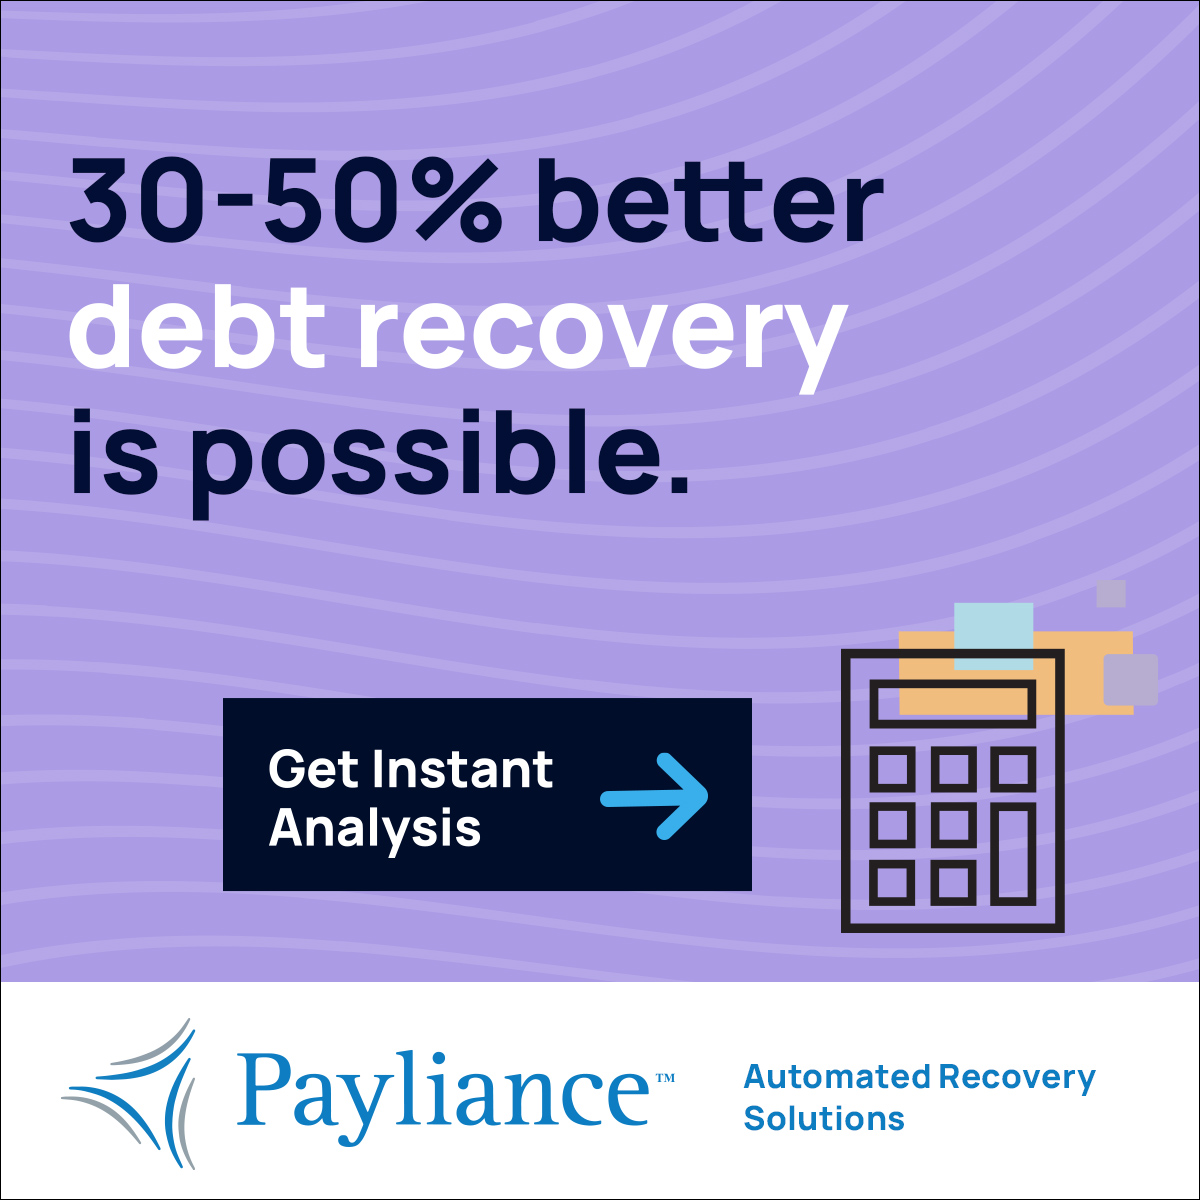 047953 Payliance ABM Debt Banners 1200x1200 Static 300